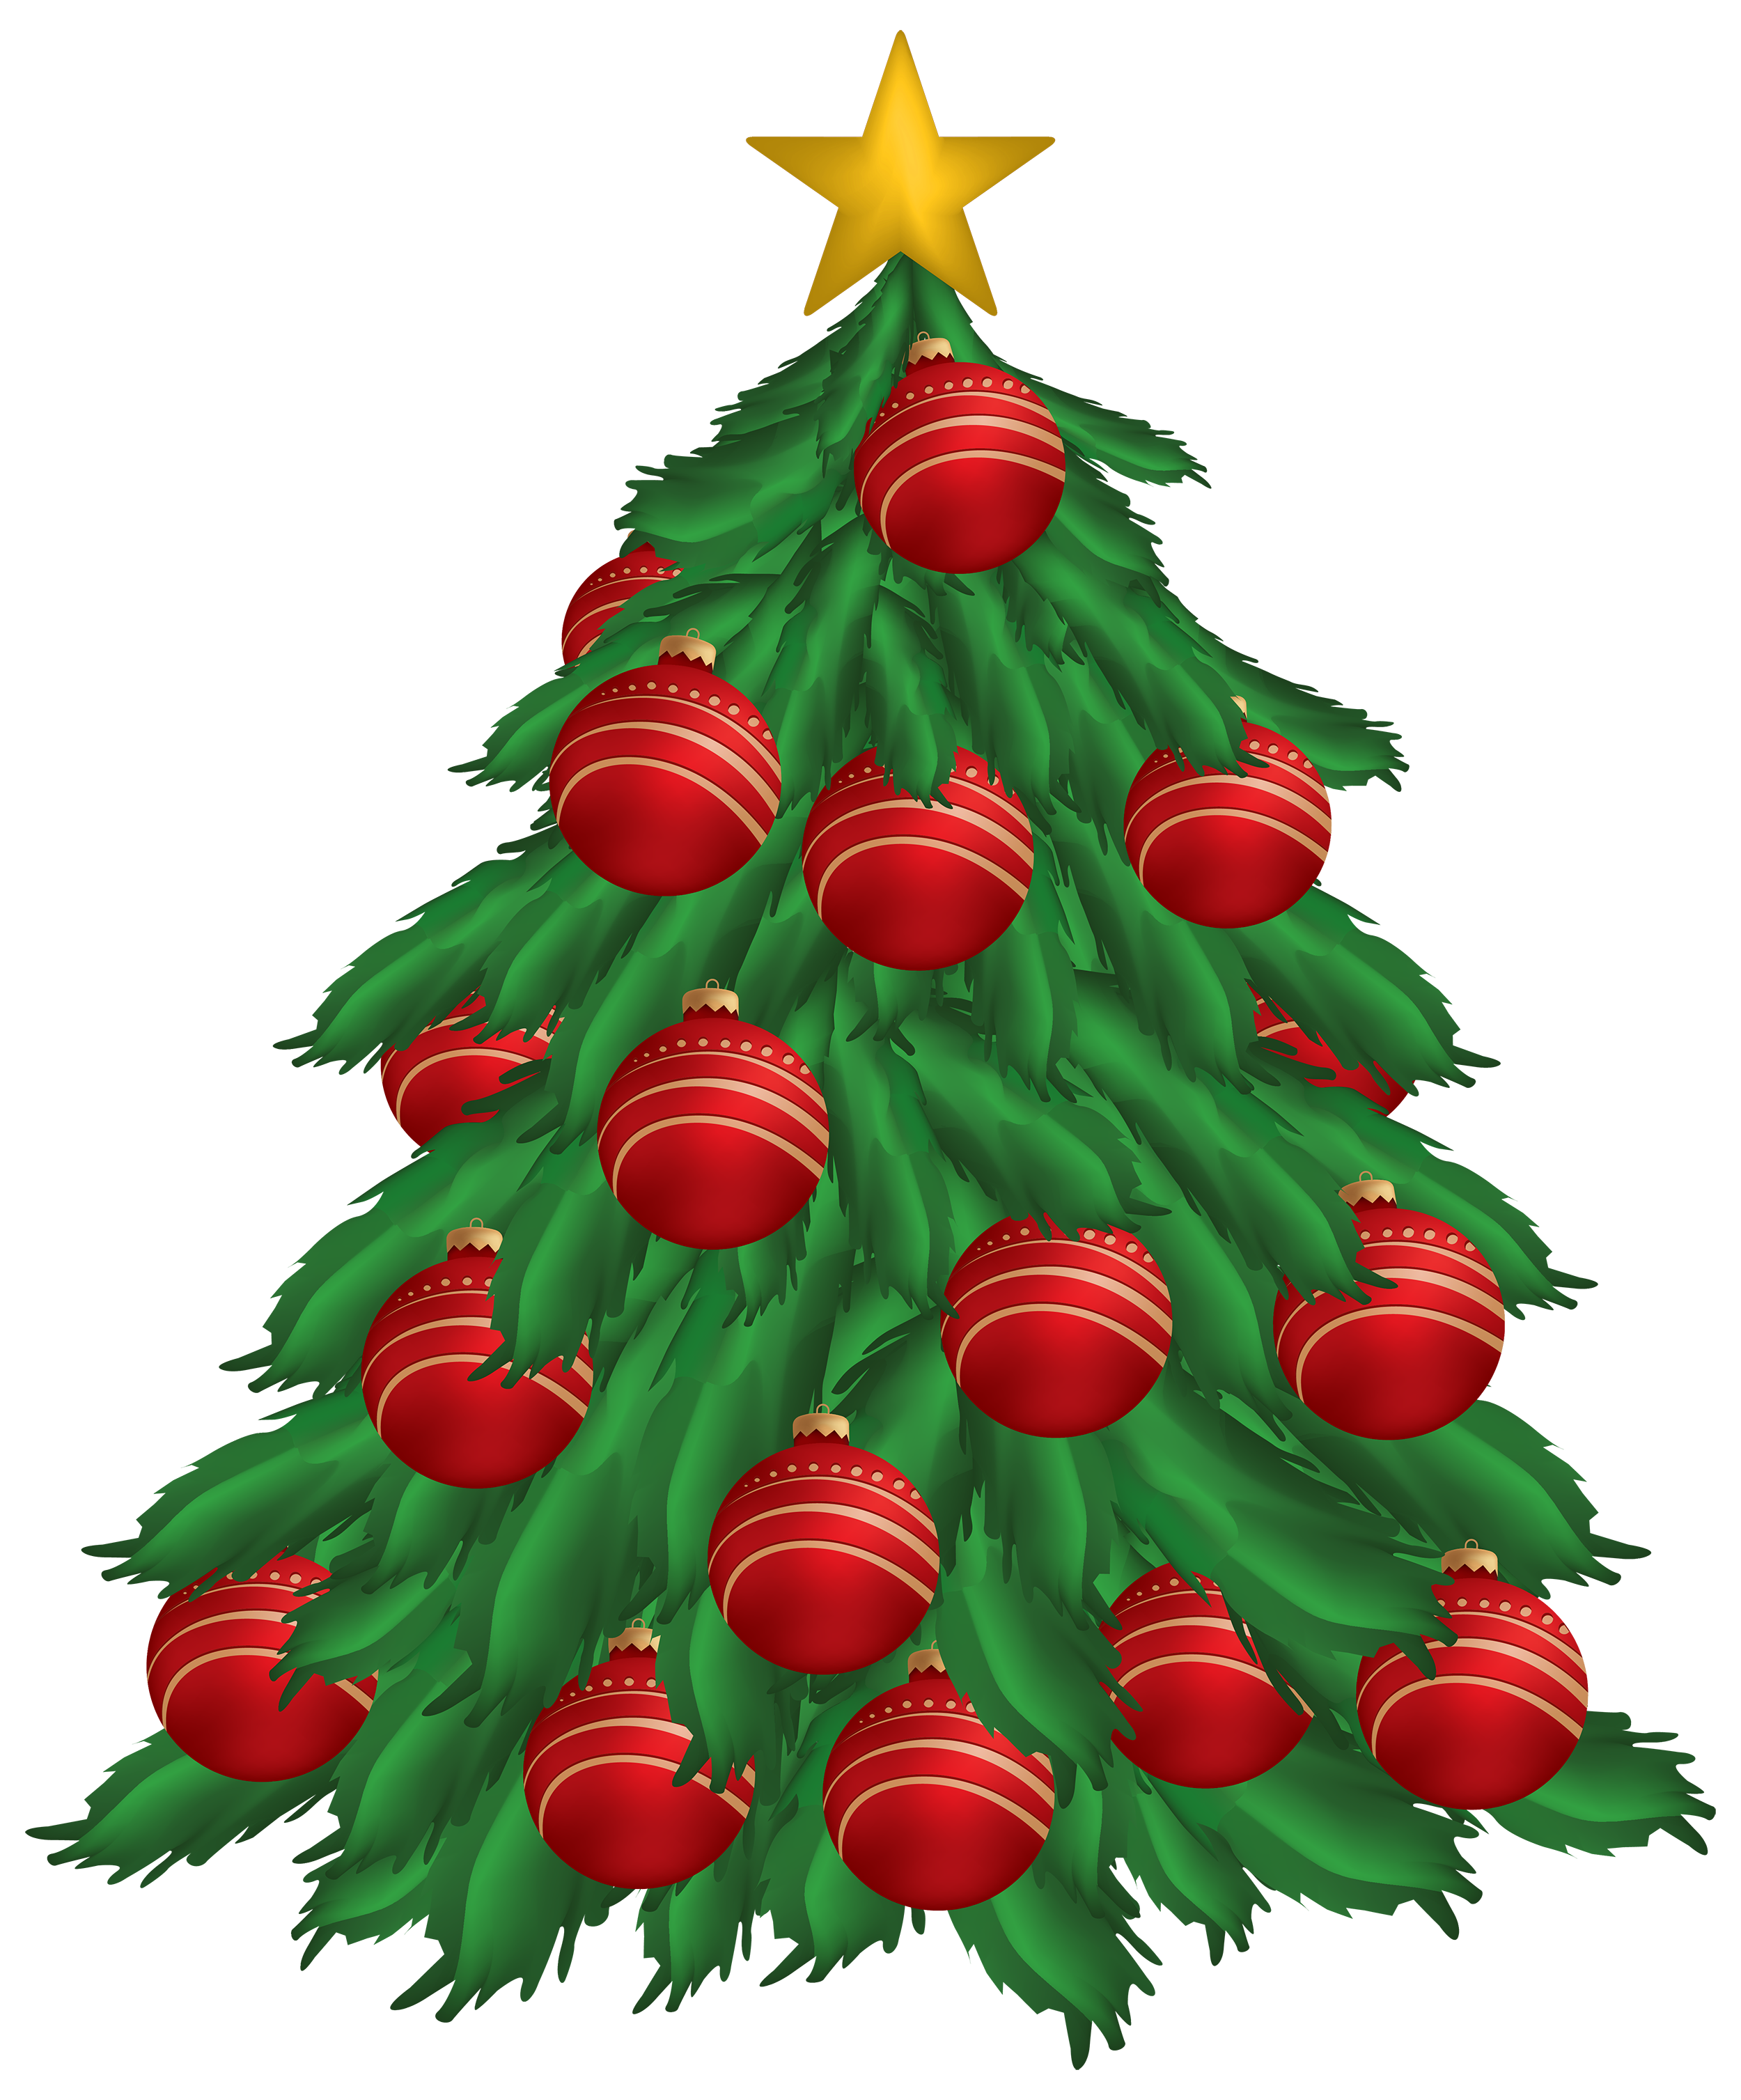 With red png best. Ornaments clipart christmas tree ornament